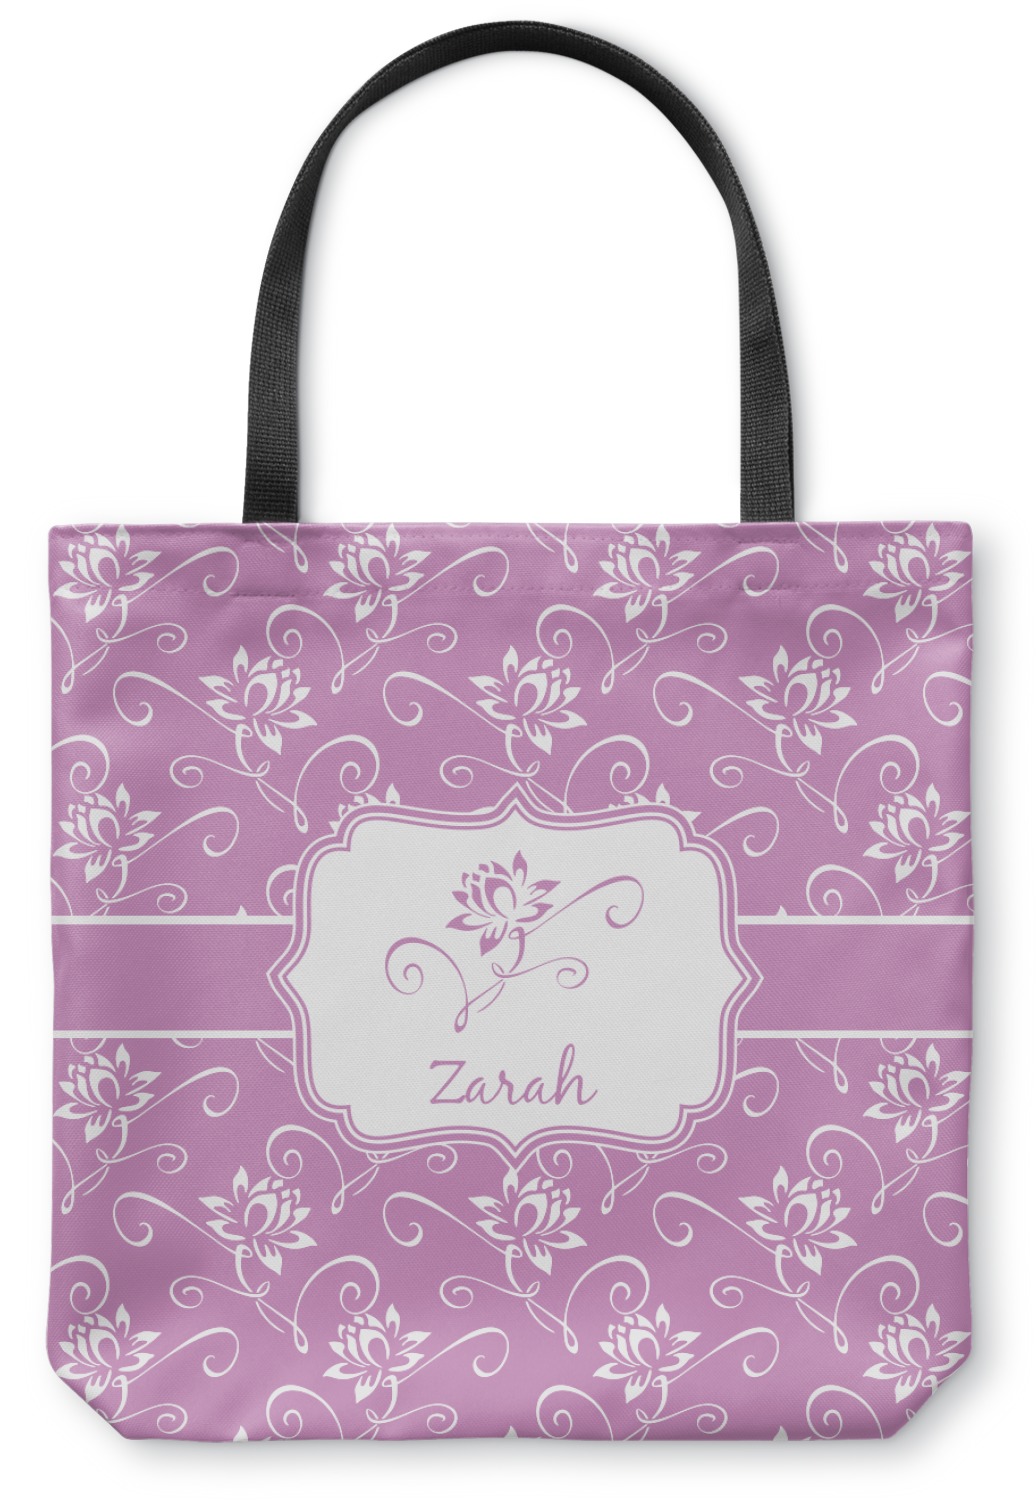 Lotus Flowers Canvas Tote Bag (Personalized) - YouCustomizeIt